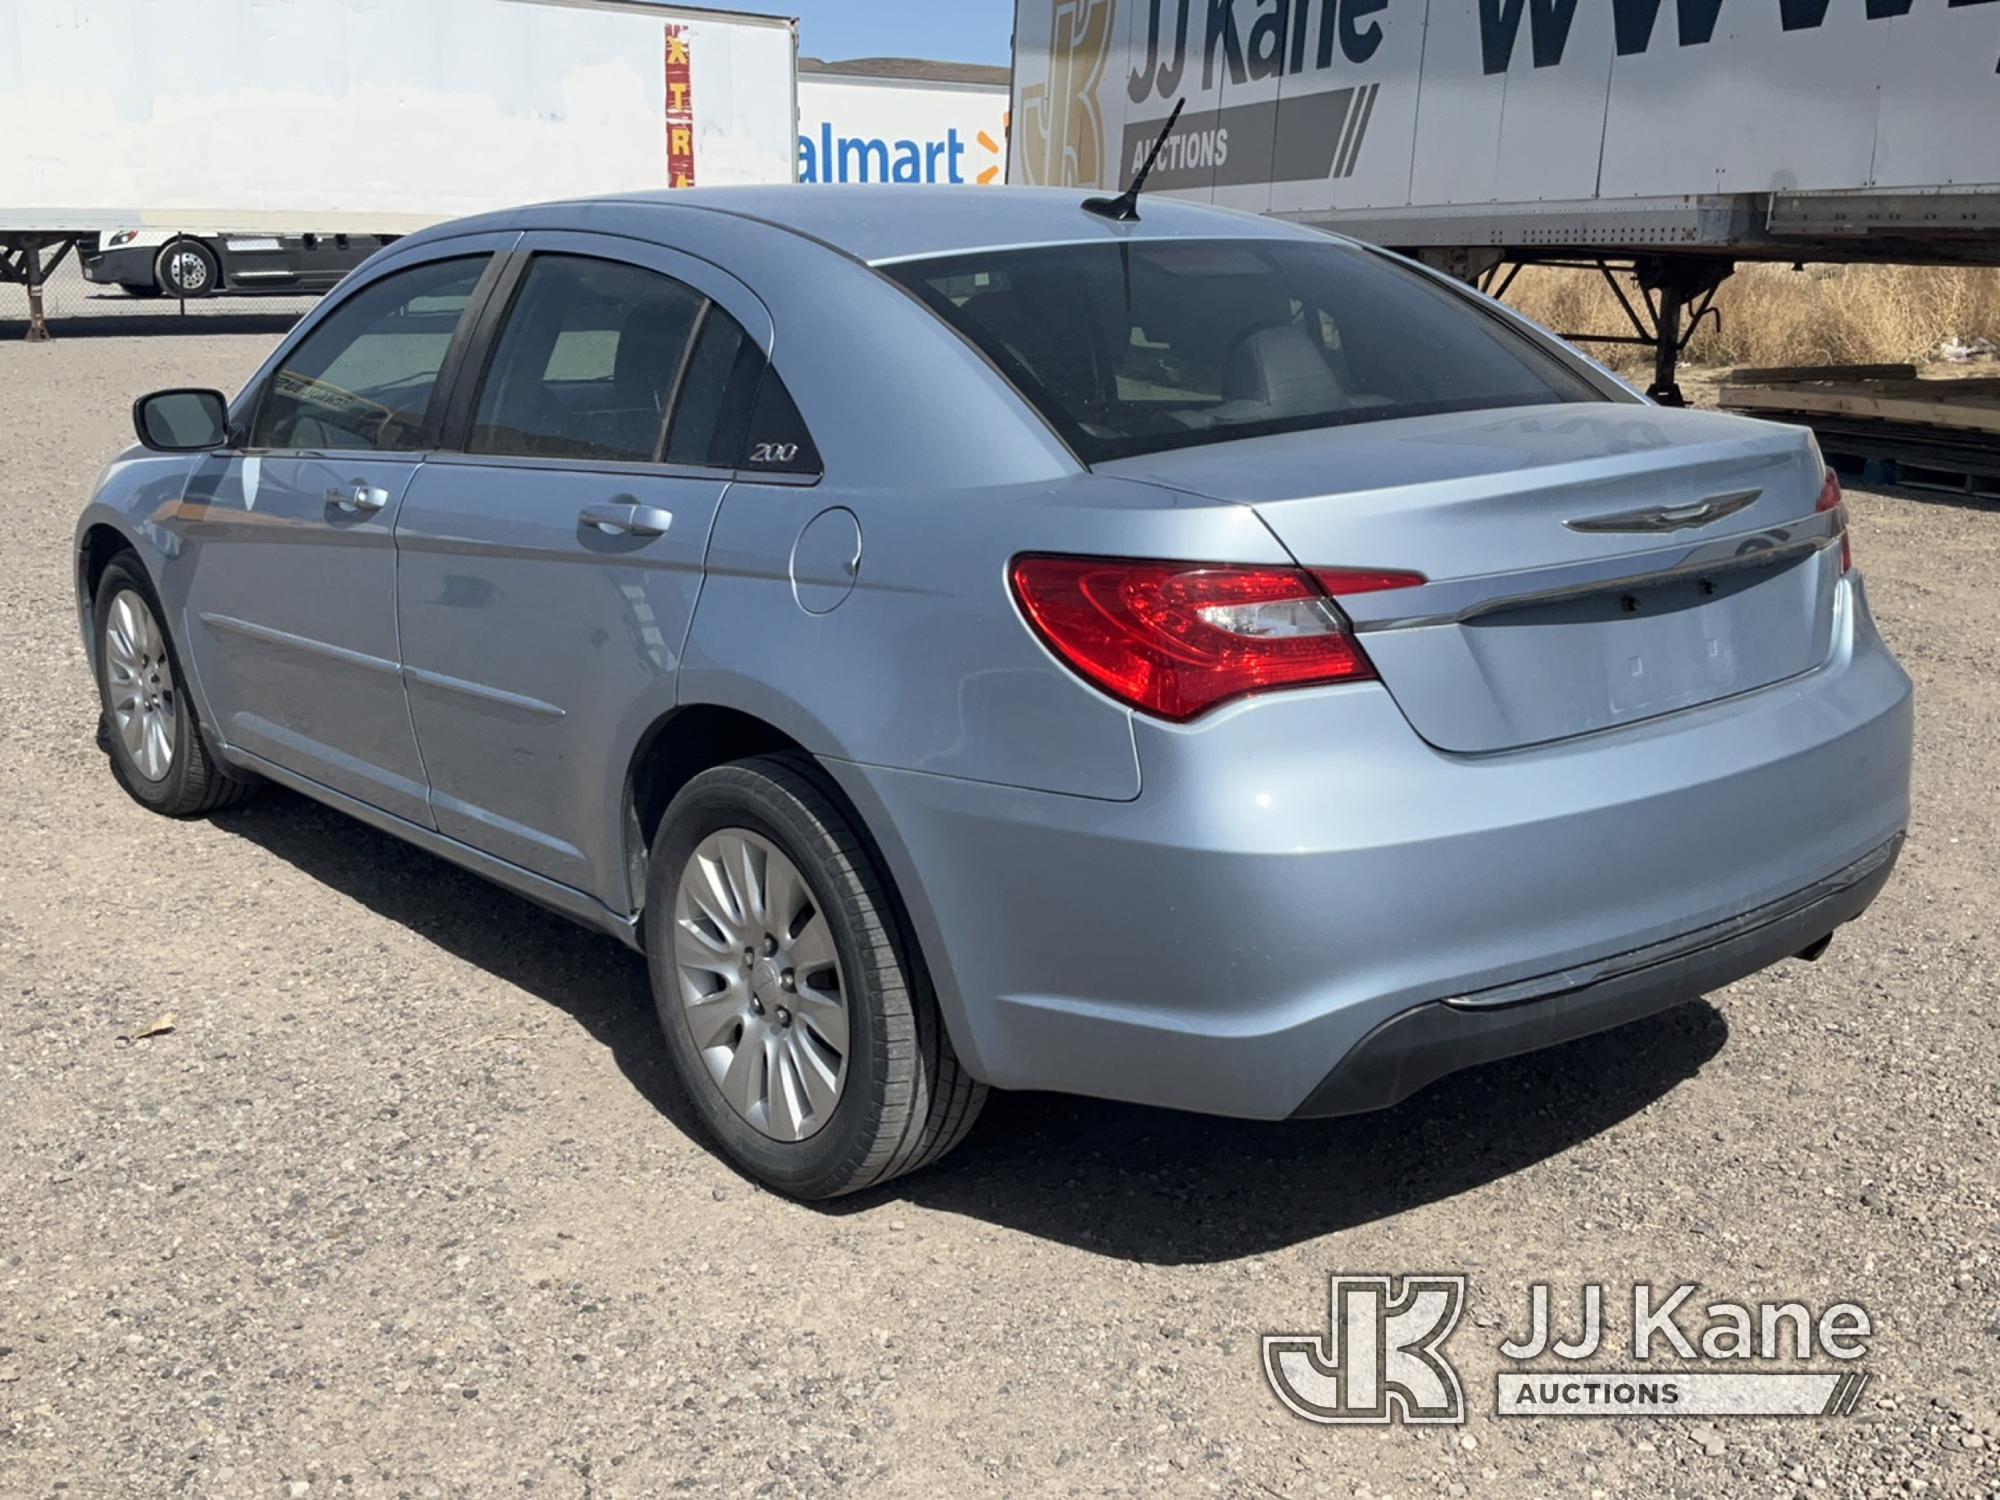 (McCarran, NV) 2013 Chrysler 200 Located In Reno Nv. Contact Nathan Tiedt To Preview 775-240-1030 Ru